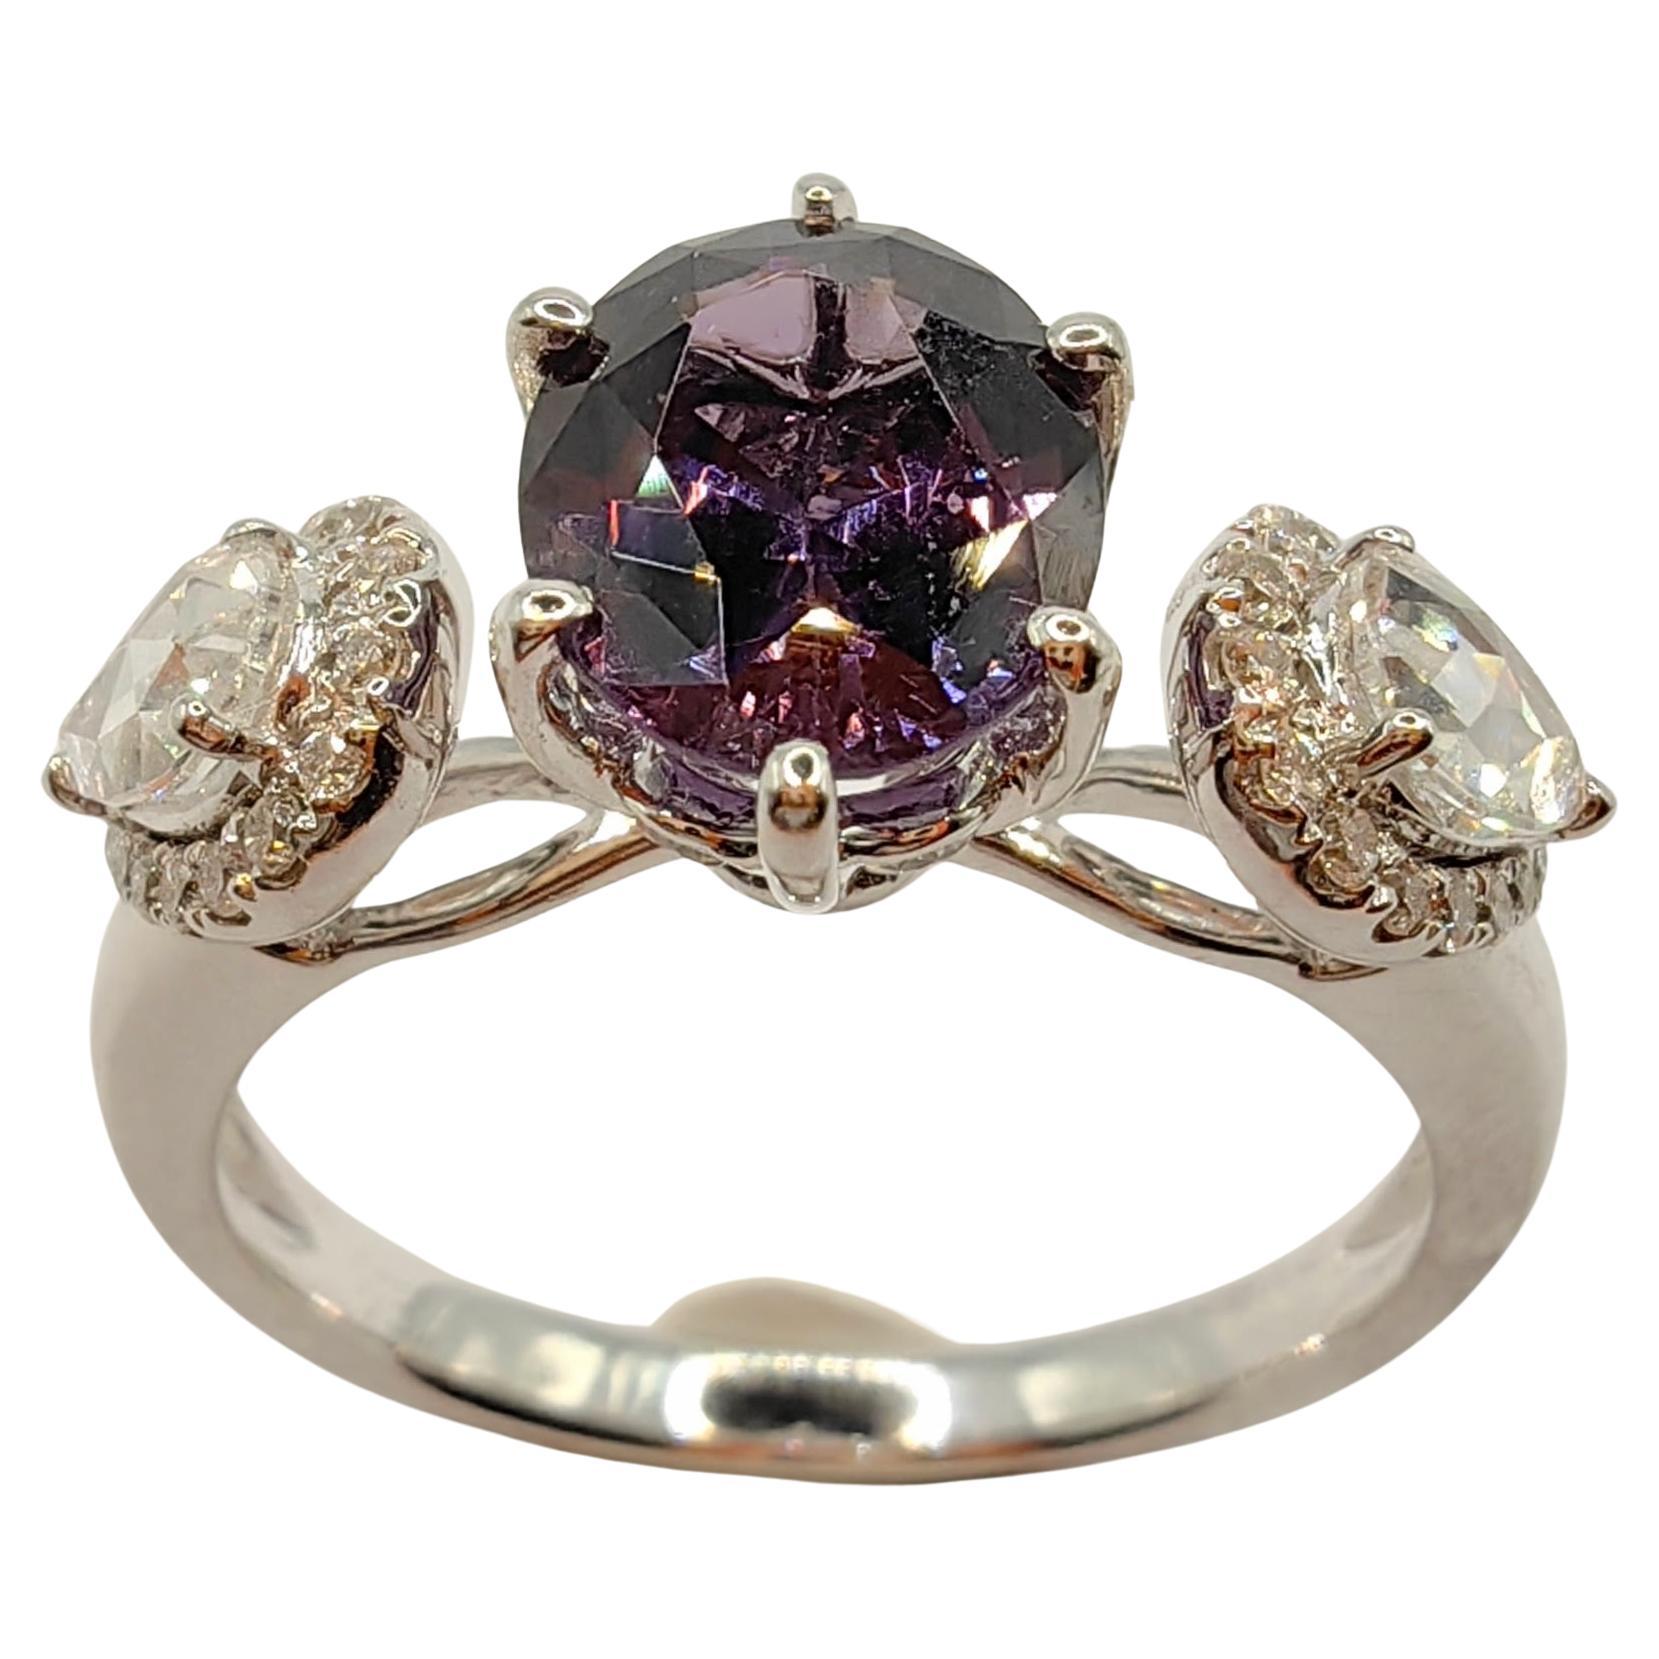 1.19 Carat Oval Cut Purple Spinel Rose Cut Halo Diamond Ring in 18K White Gold